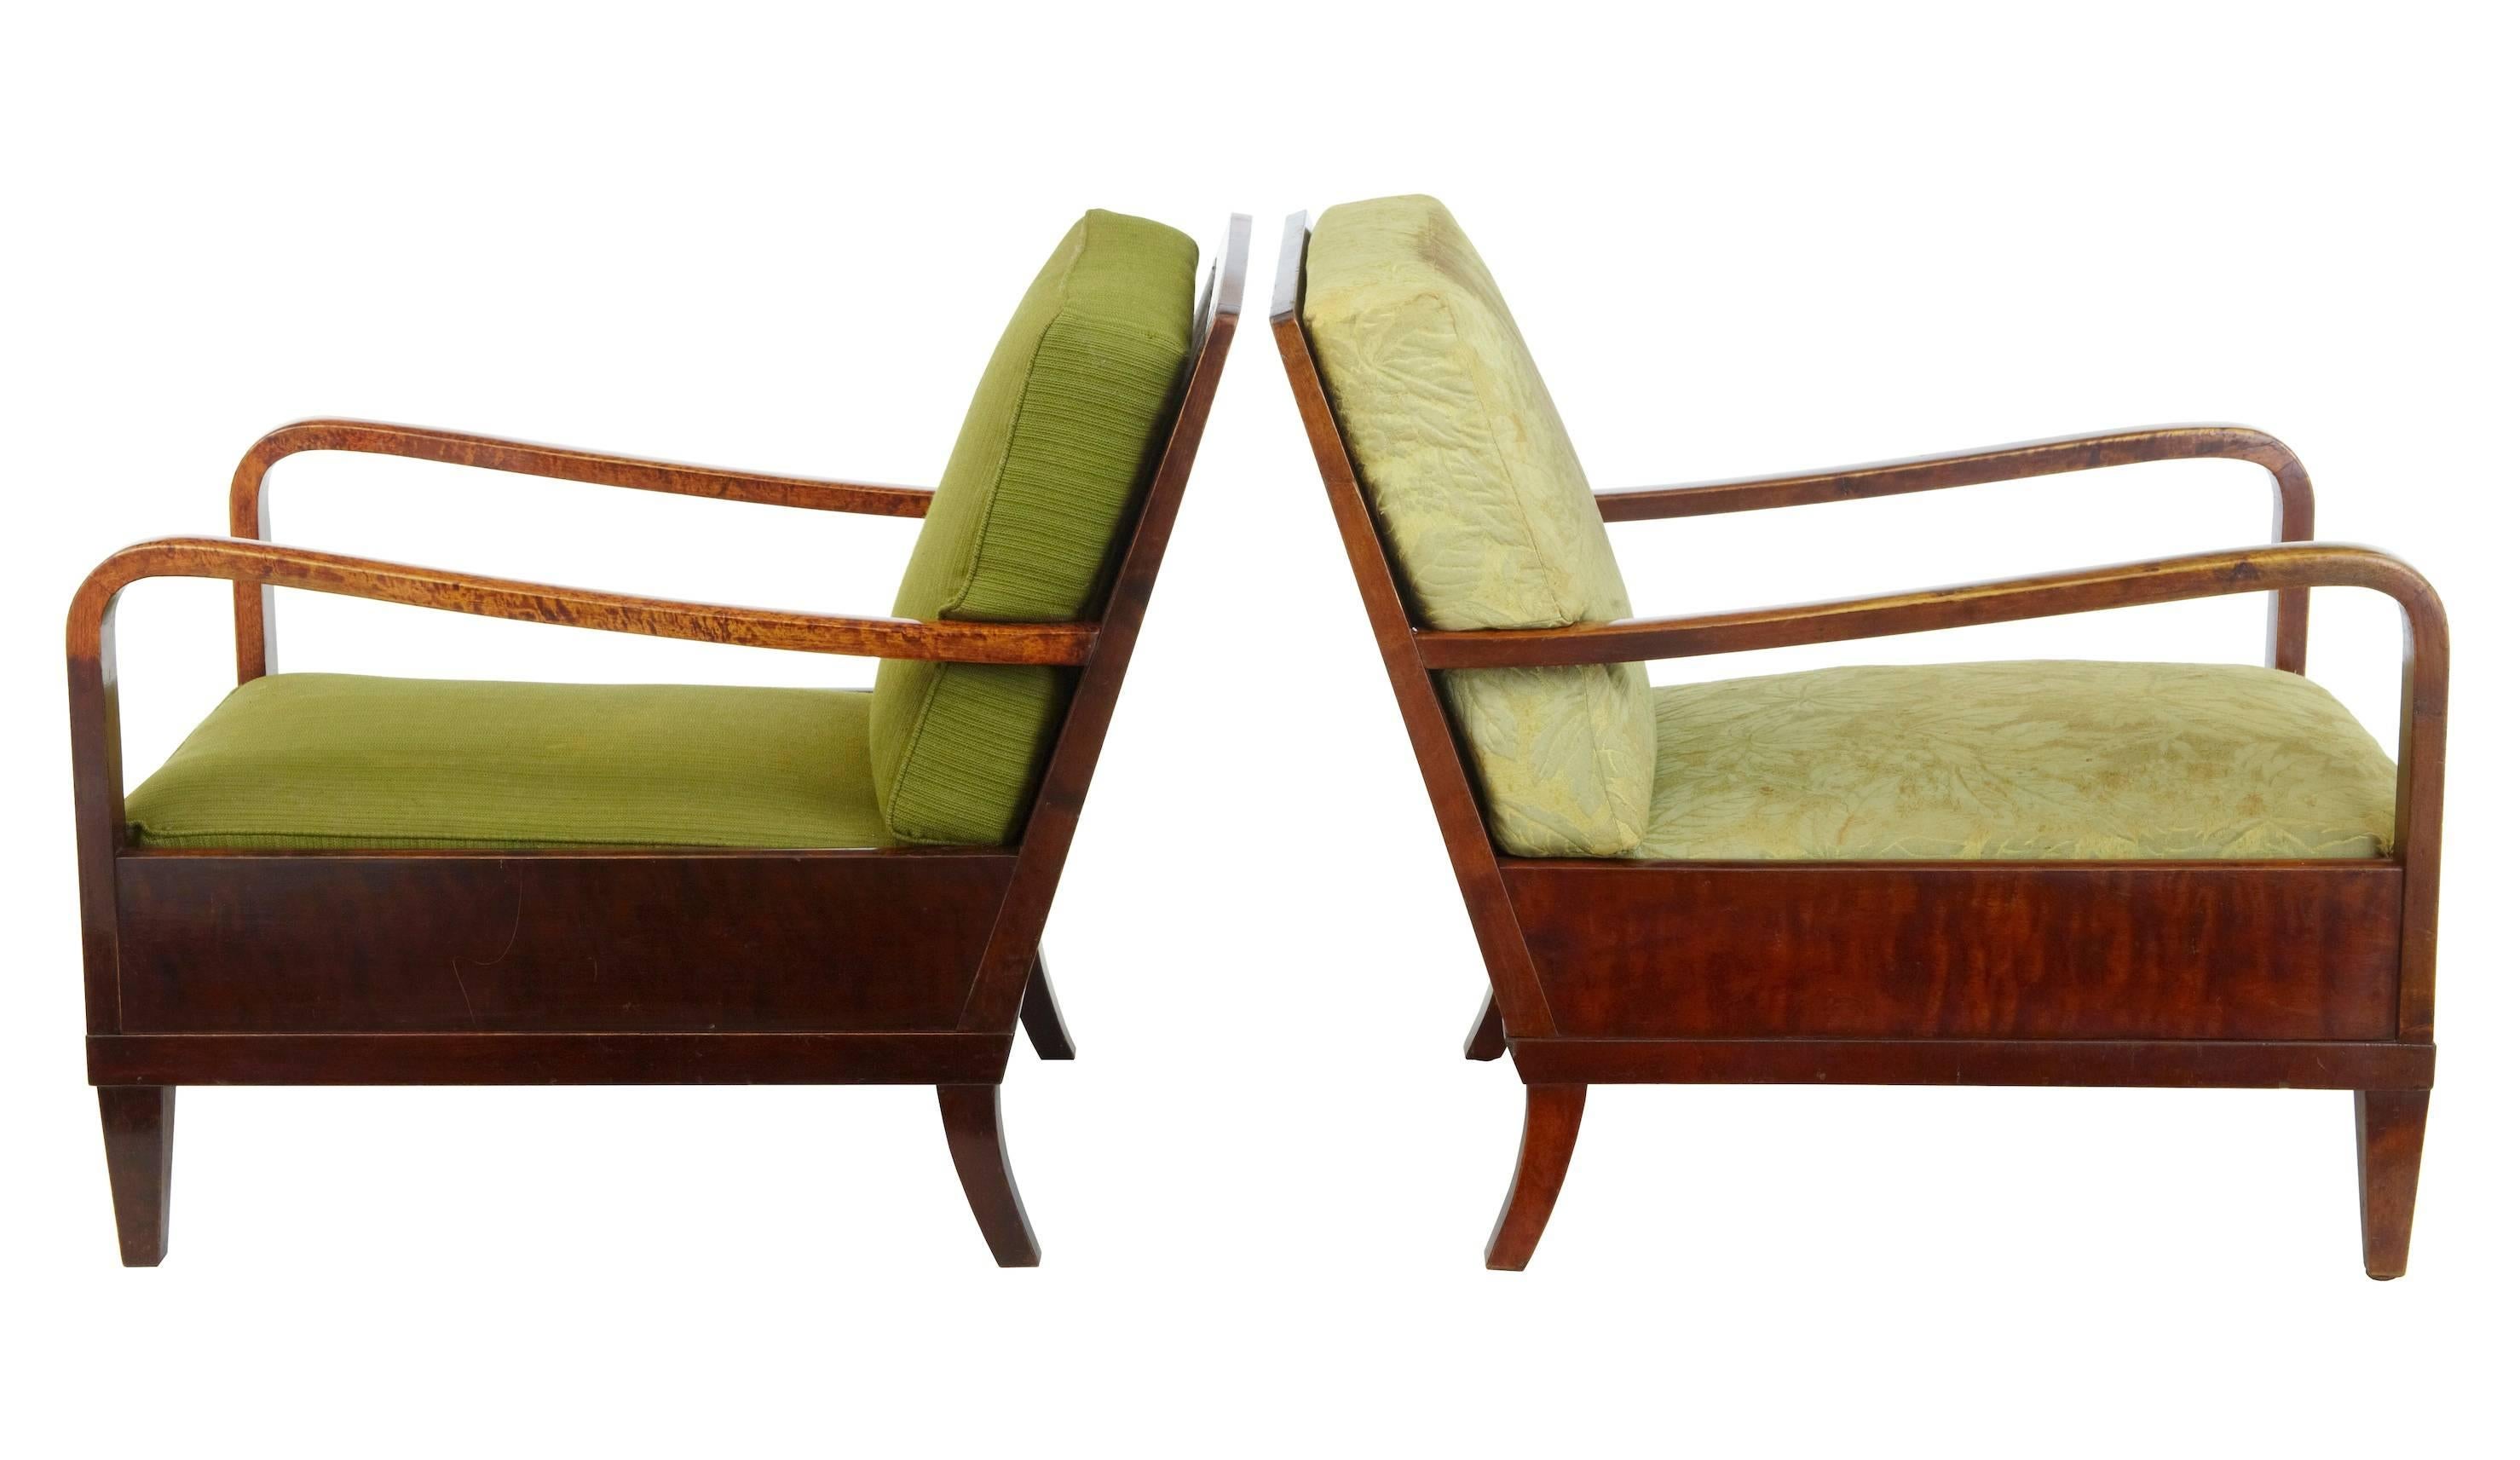 Here we have a fine pair of pure Art Deco lounge chairs, circa 1920.
Ready to be recovered to bring back to former glory.
Beautifully inlaid down the arm.
One in original cover, other in later covering.
Minor marks and repairs to